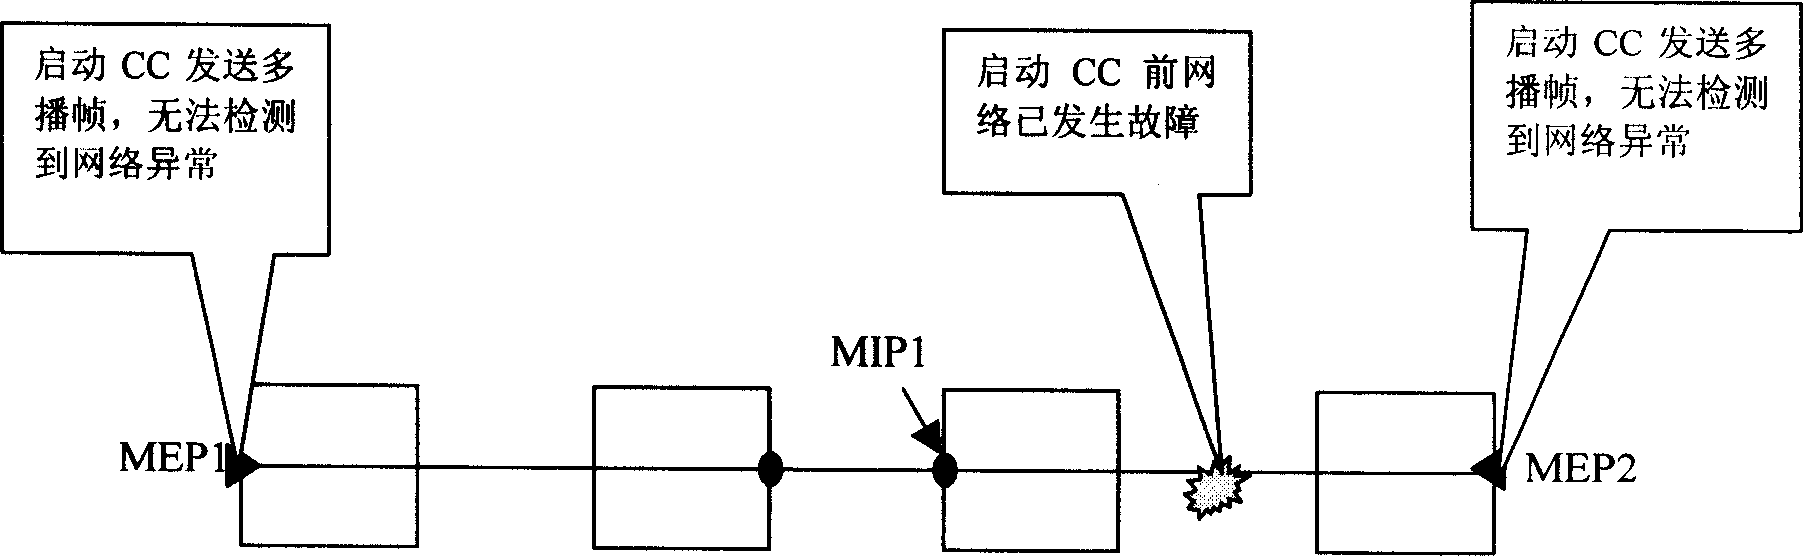 Continuity inspection method